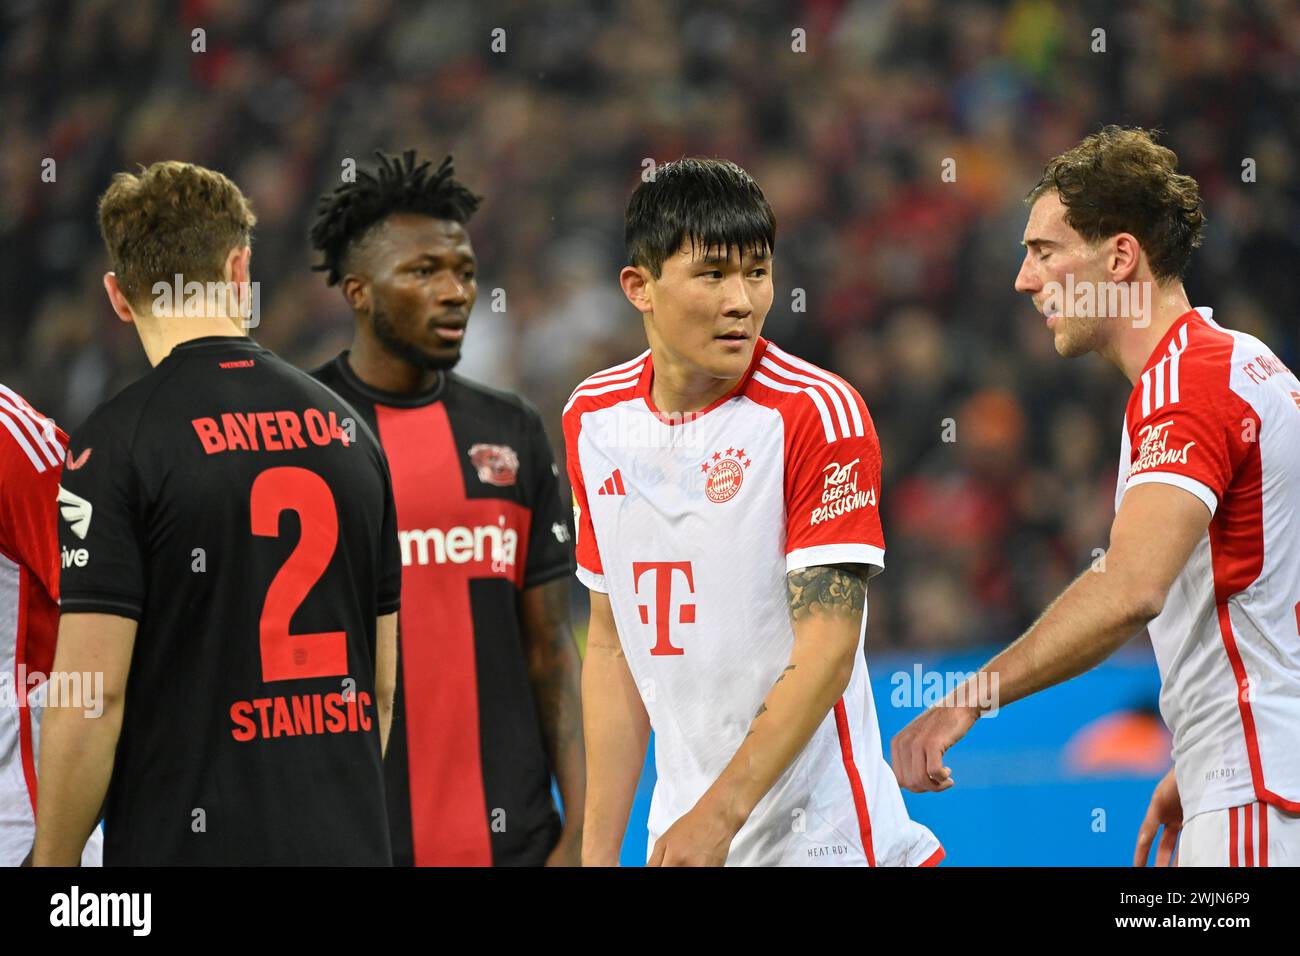 Leverkusen, Germany. 10th Feb, 2024. LEVERKUSEN, GERMANY, 10. February 2024; 3 Minjae KIM during the Bundesliga football match between Bayer 04 Leverkusen and FC Bayern München at BayArena on 10. February 2024 in Leverkusen, Germany. ( picture Jerry ANDRE/ATP images ) (ANDRE Jerry /ATP/SPP) Credit: SPP Sport Press Photo. /Alamy Live News Stock Photo